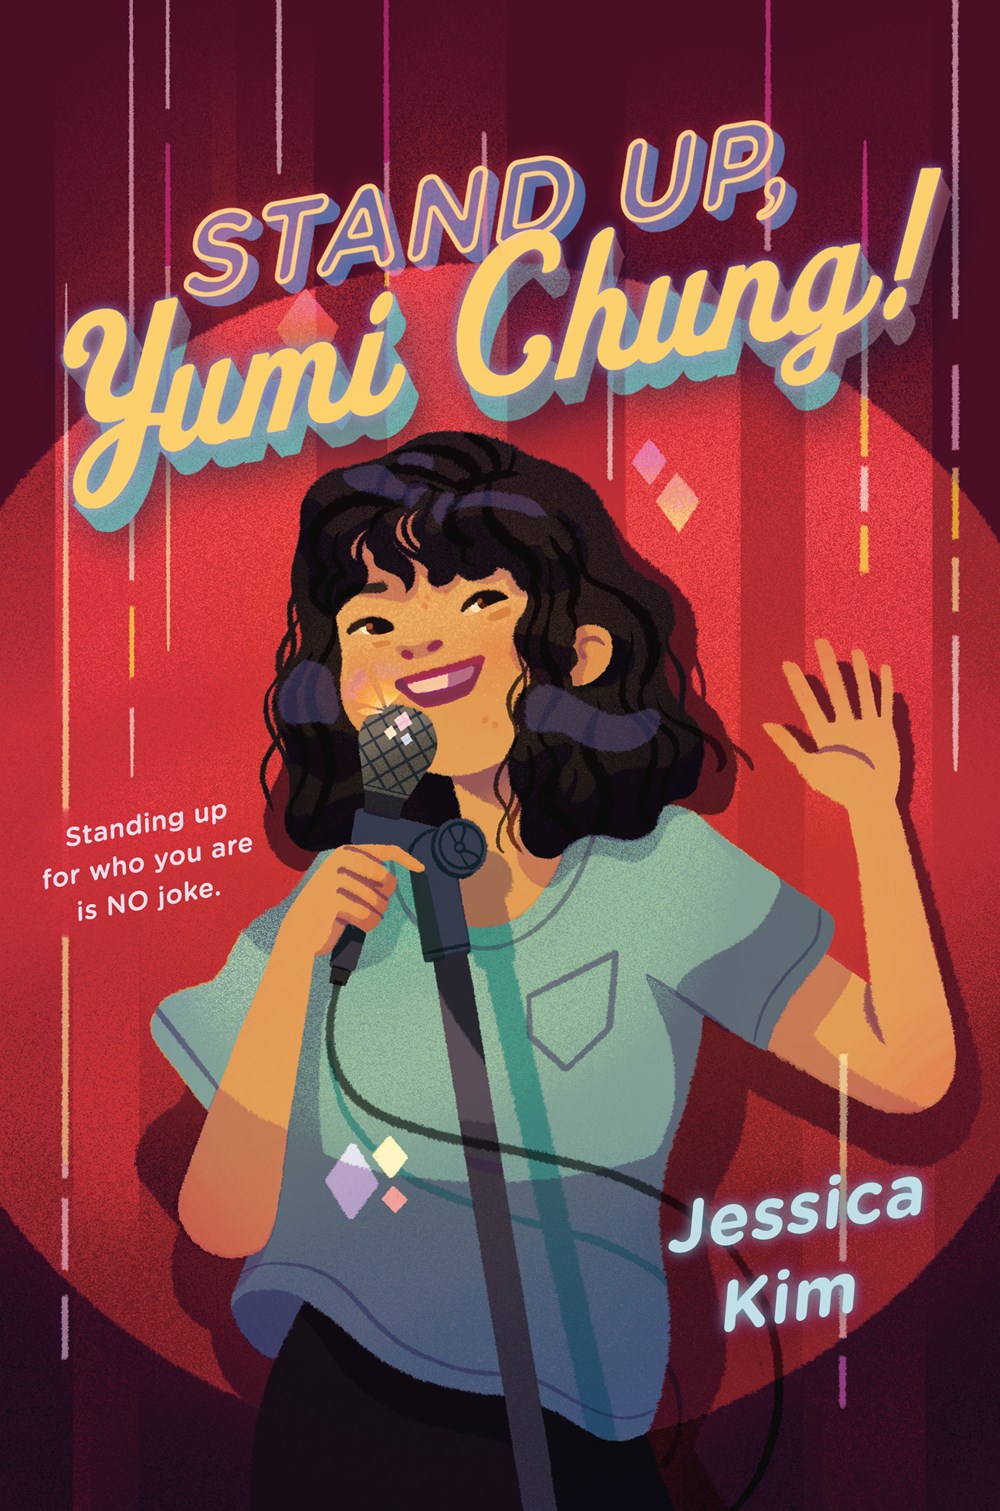 Image of "Stand Up, Yumi Chung!"